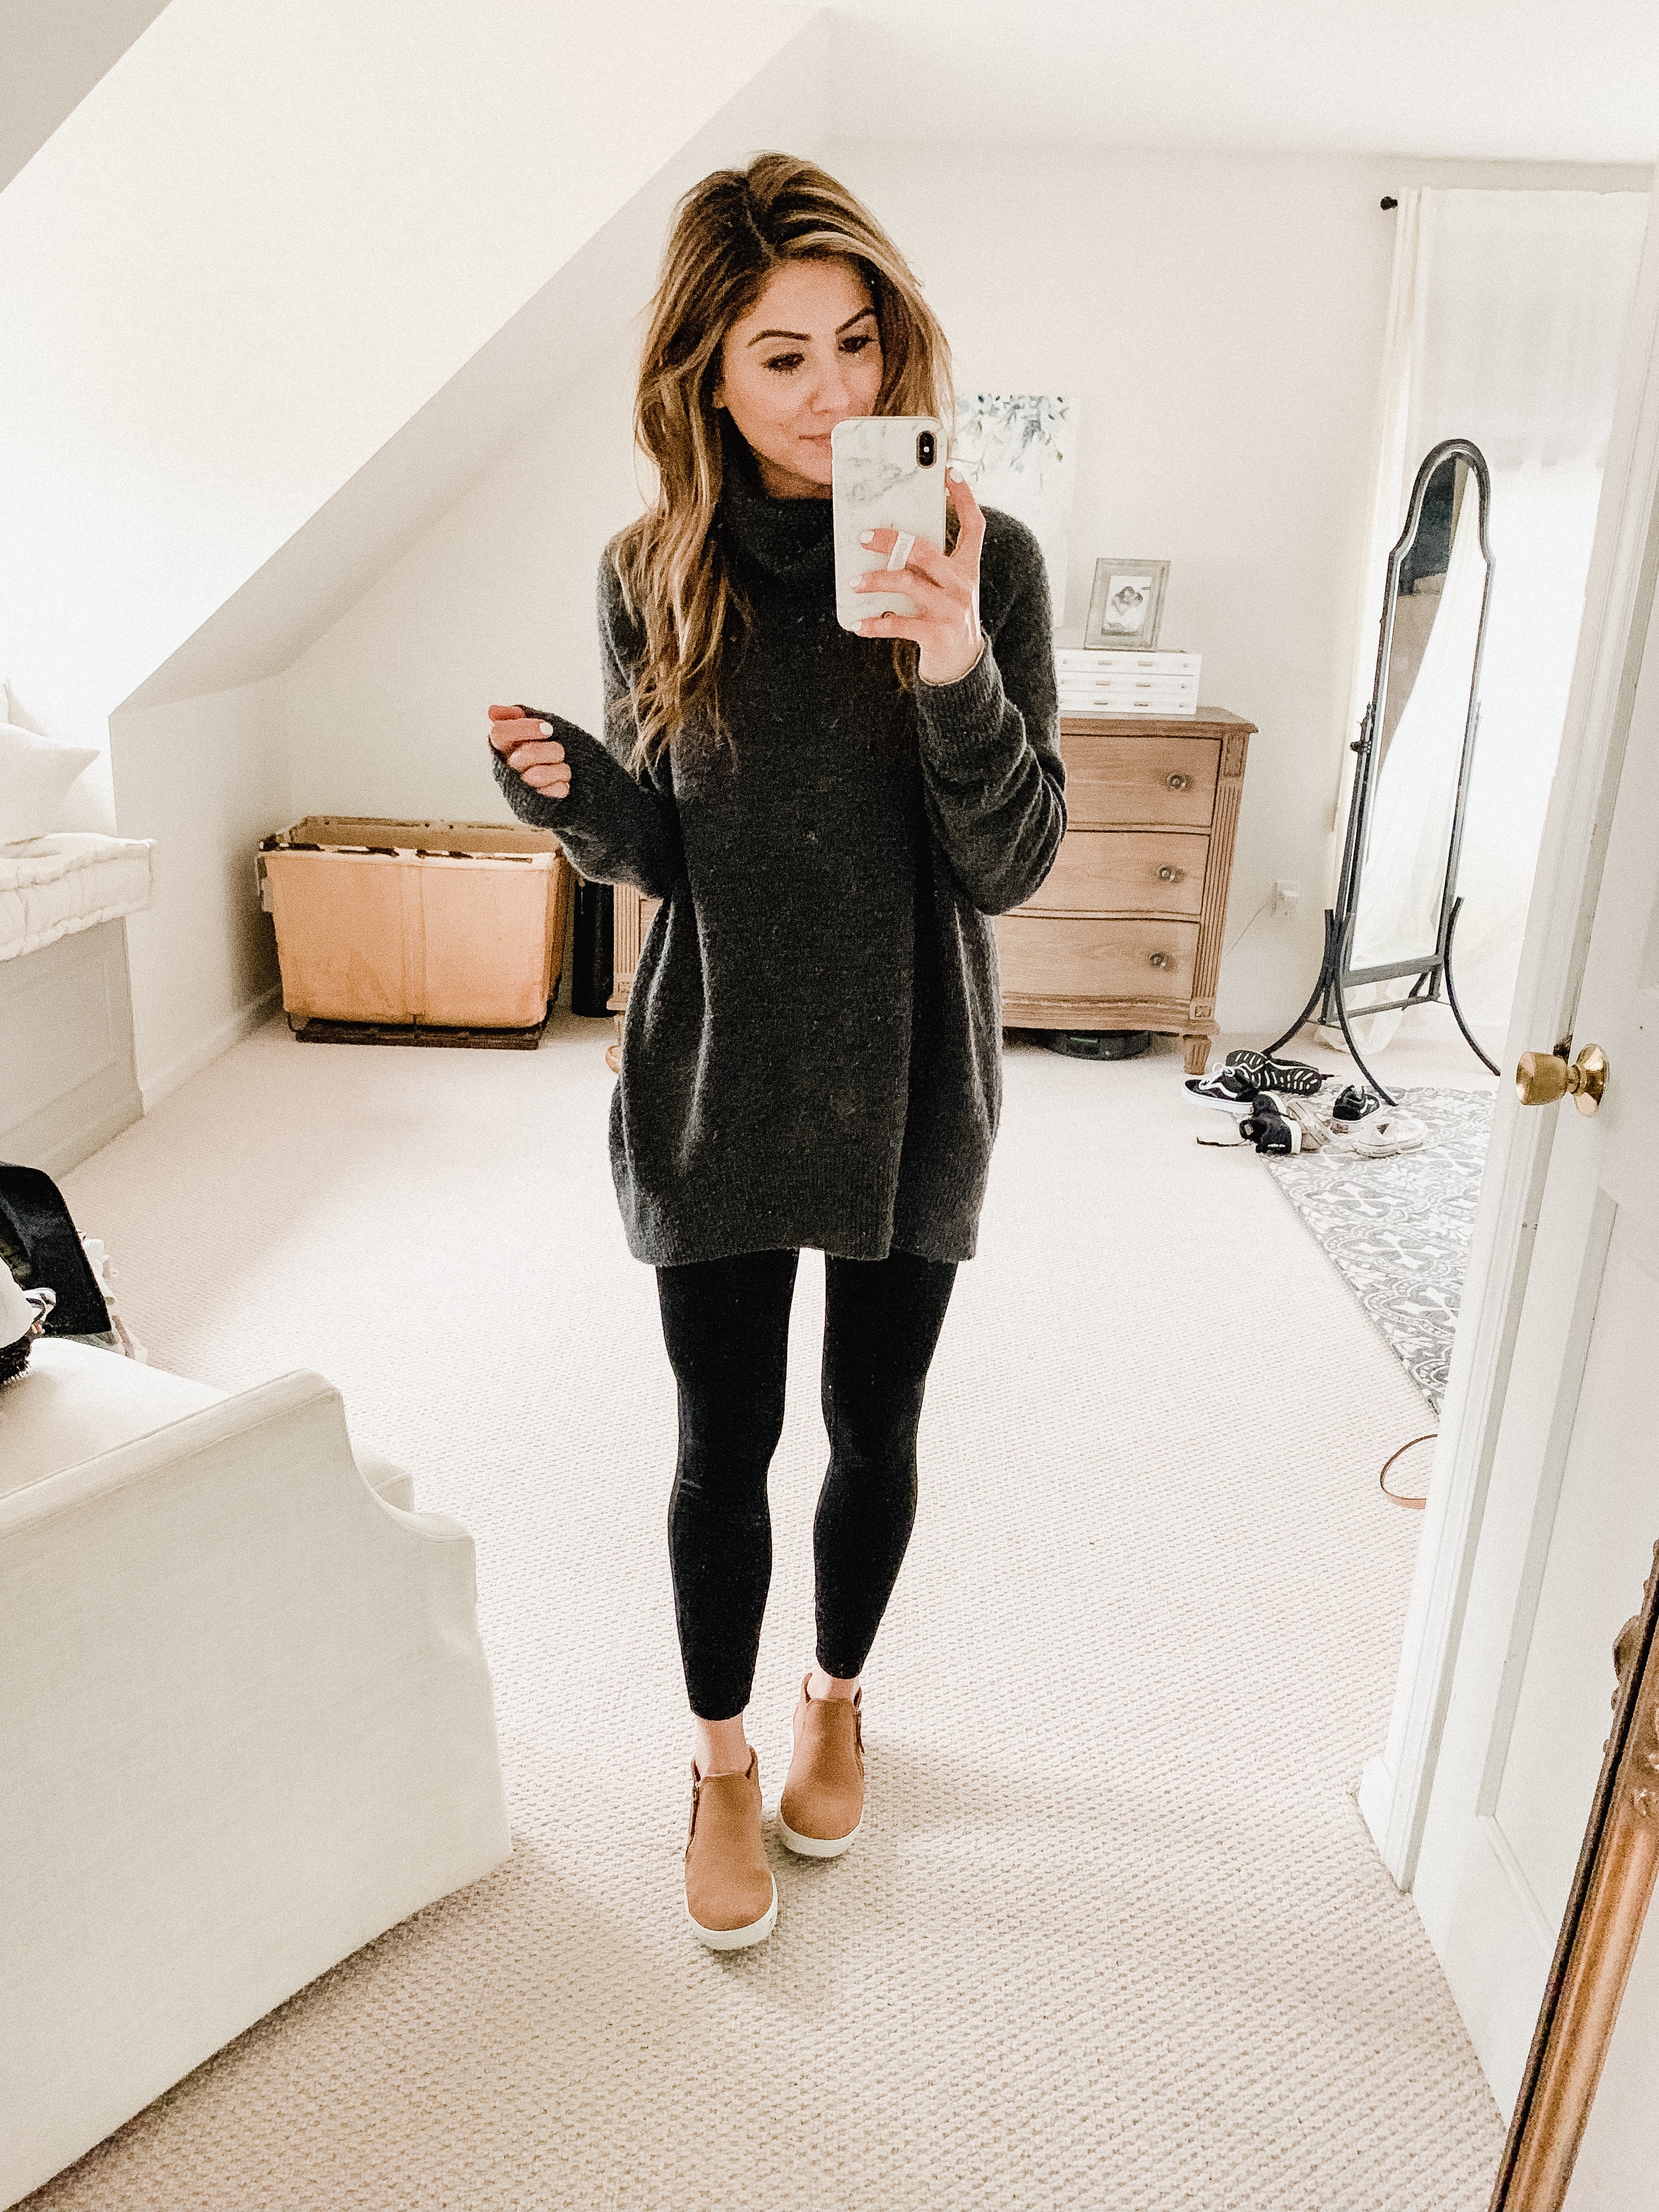 Connecticut life and style blogger Lauren McBride shares 12 Ways to Style Jogger Leggings featuring a variety of outfit inspiration ideas.